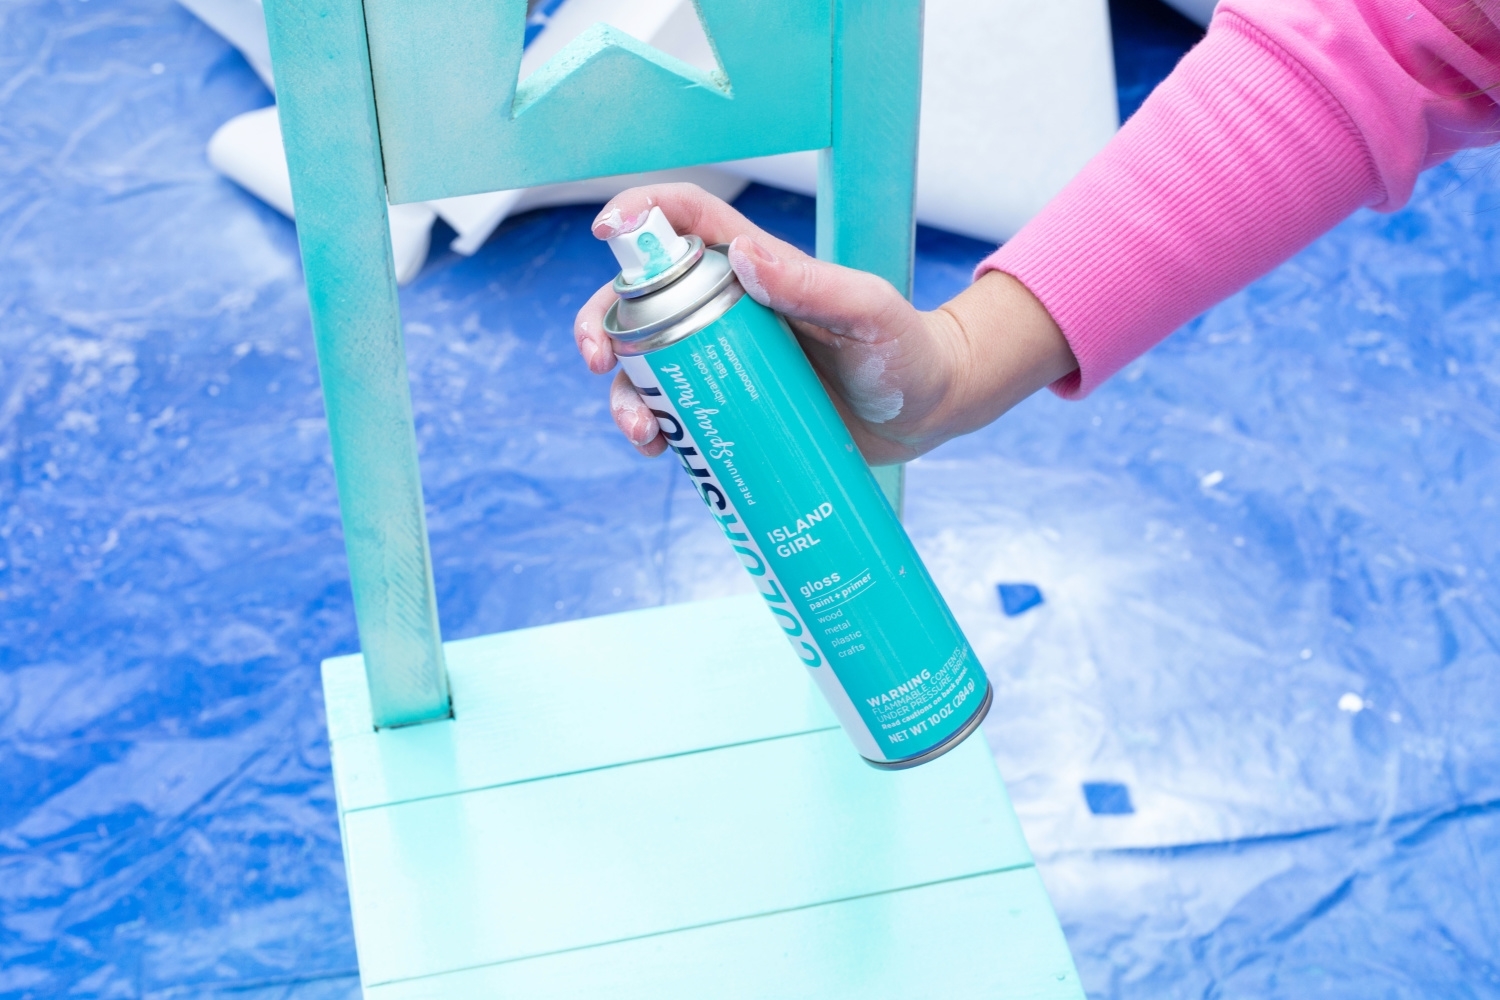 Apply spray paint to she shed furniture